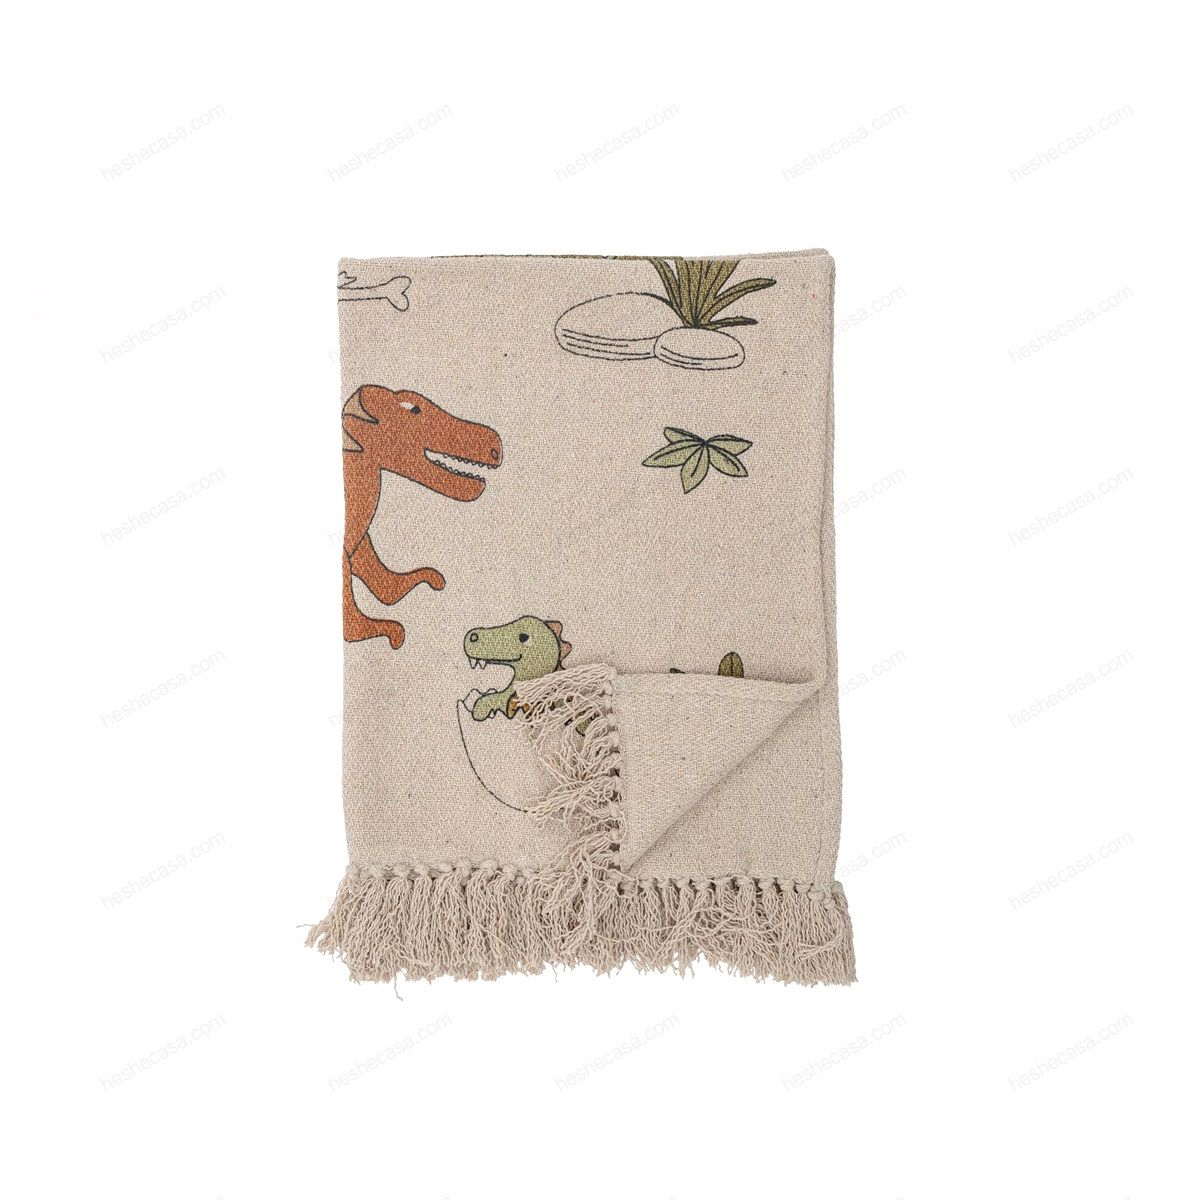 Maurice Throw, Nature, Recycled Cotton 毯子